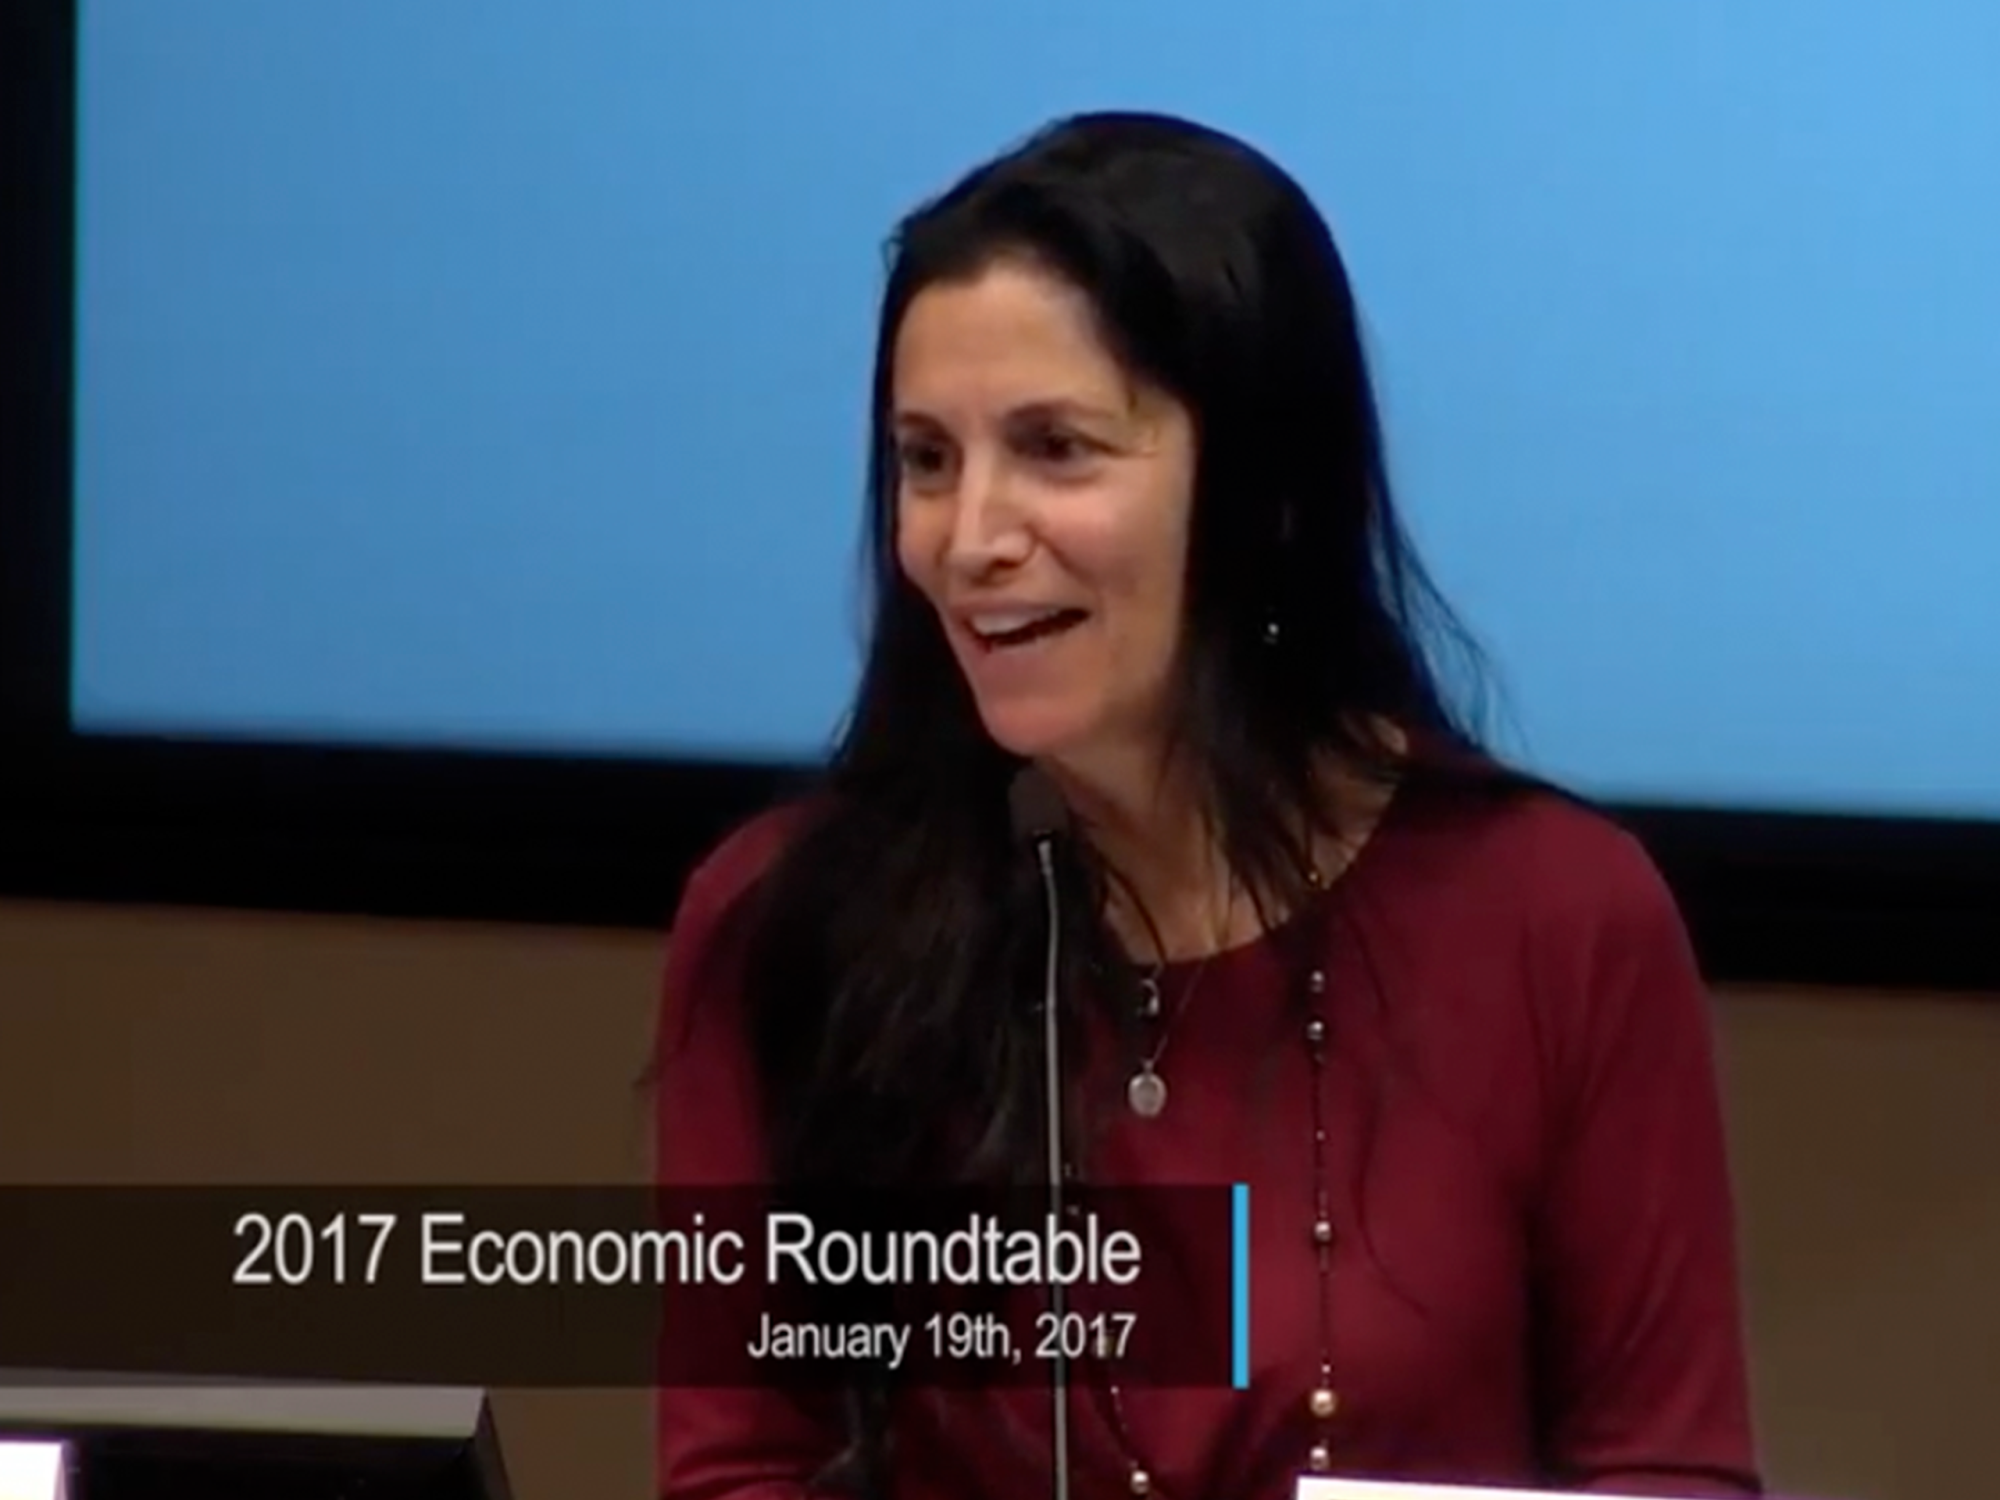 A screenshot of Gina Champion-Cain speaking at the 2017 San Diego Economic Roundtable panel at the University of San Diego.